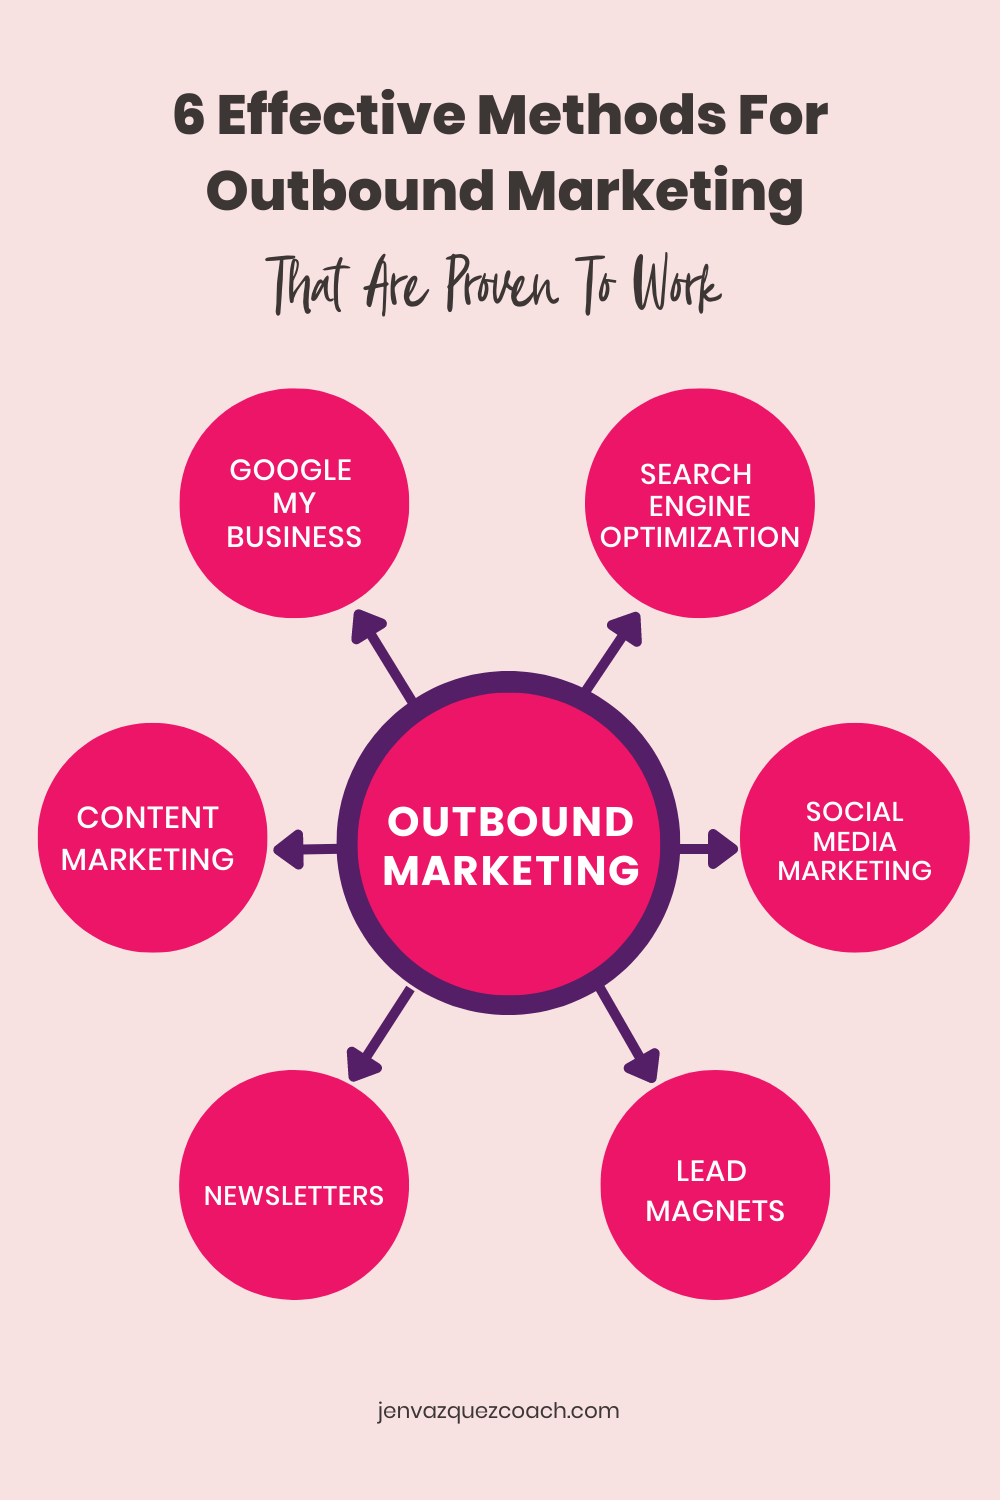 6 Effective Methods For Outbound Marketing that are Proven to Work for Jen Vazquez Media